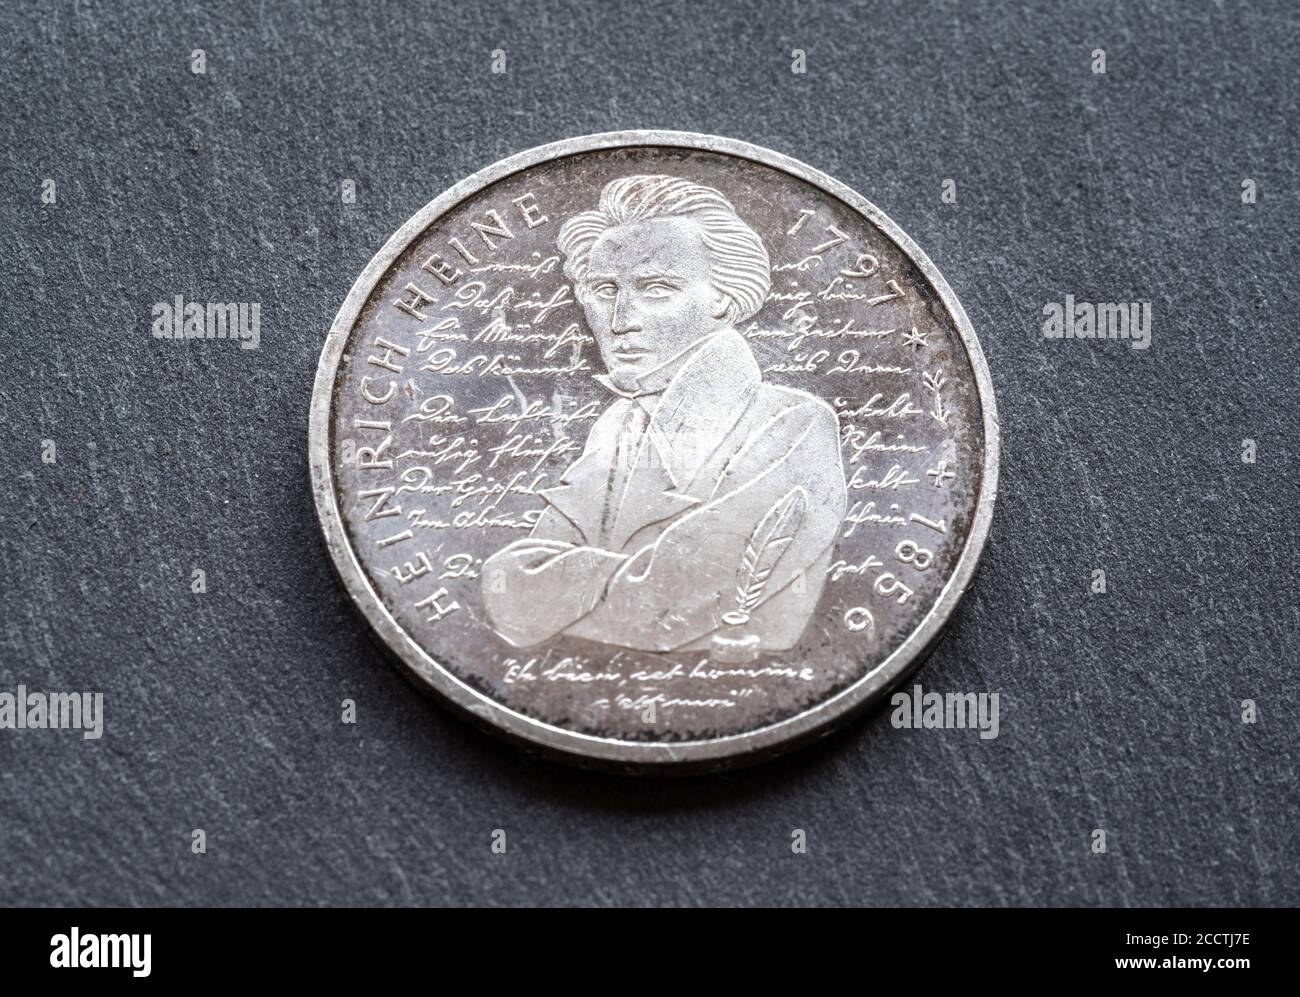 German Germany circulated silver memorial Heinrich Heine 10 DM discontinued Deutsche Mark coin dated 1997 slightly soiled Stock Photo